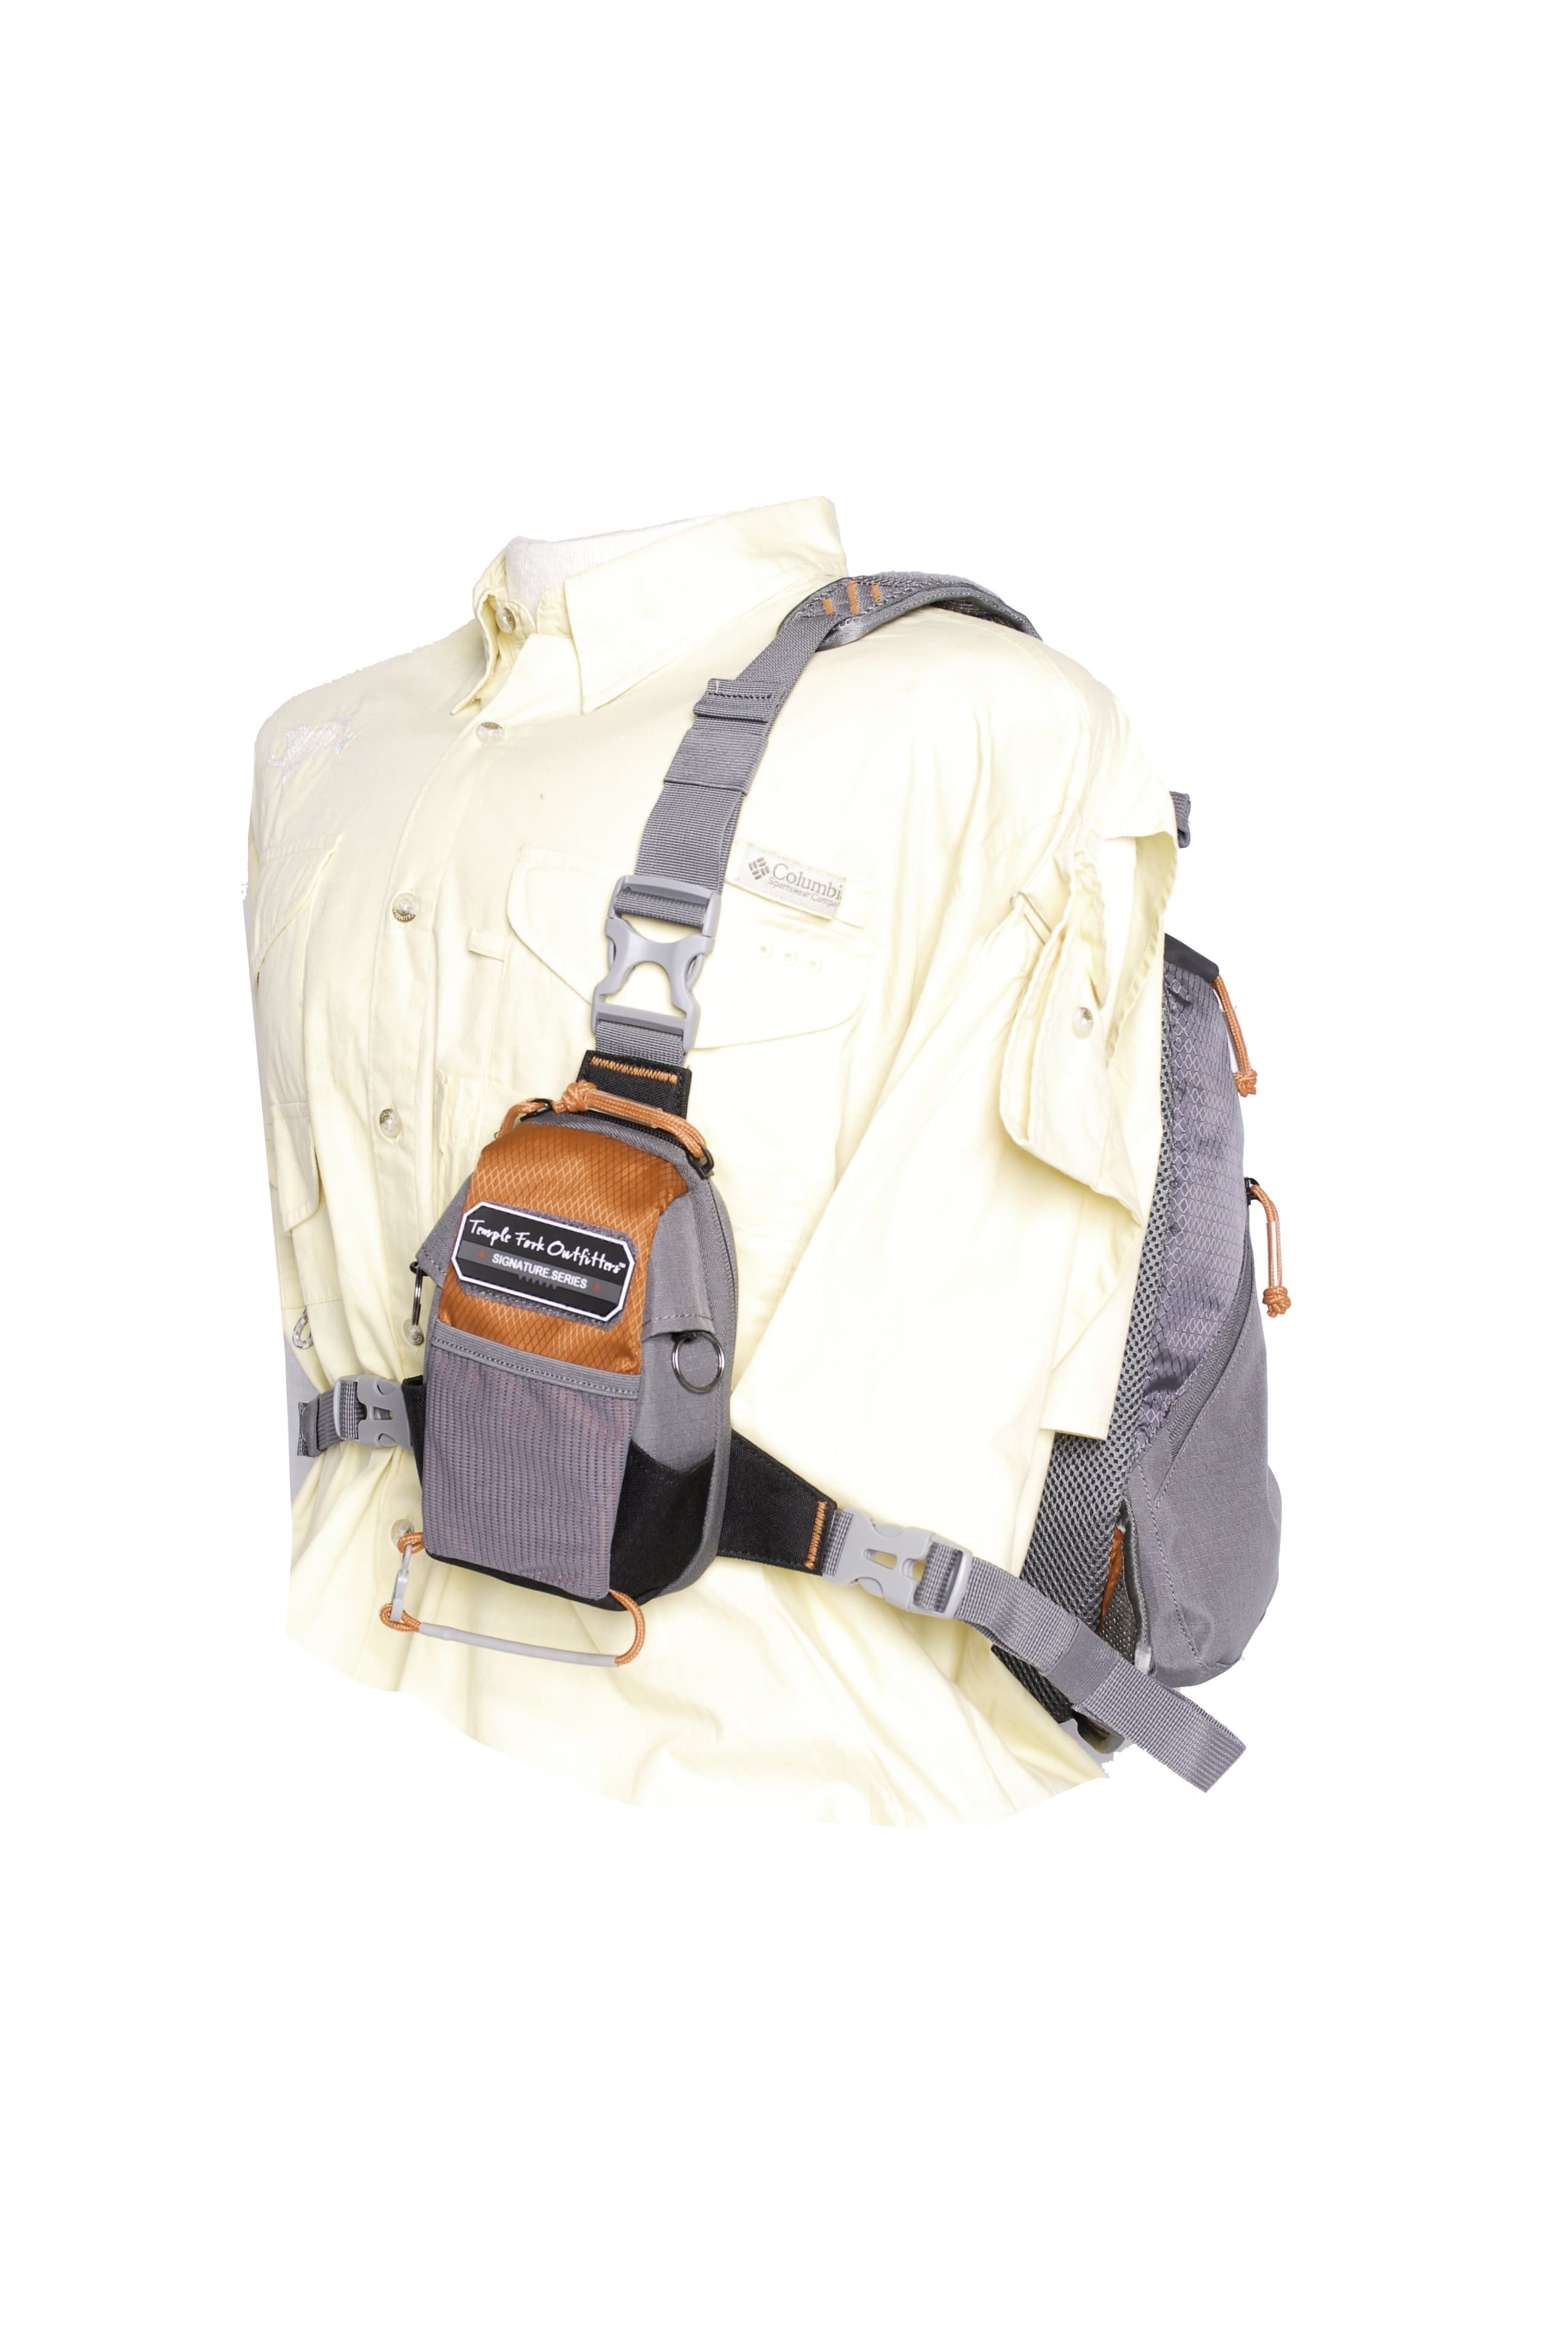 TFO Fishing : Fly Fishing TFO inHybridin Backpack Chest Pack 13in x 1in x 1in